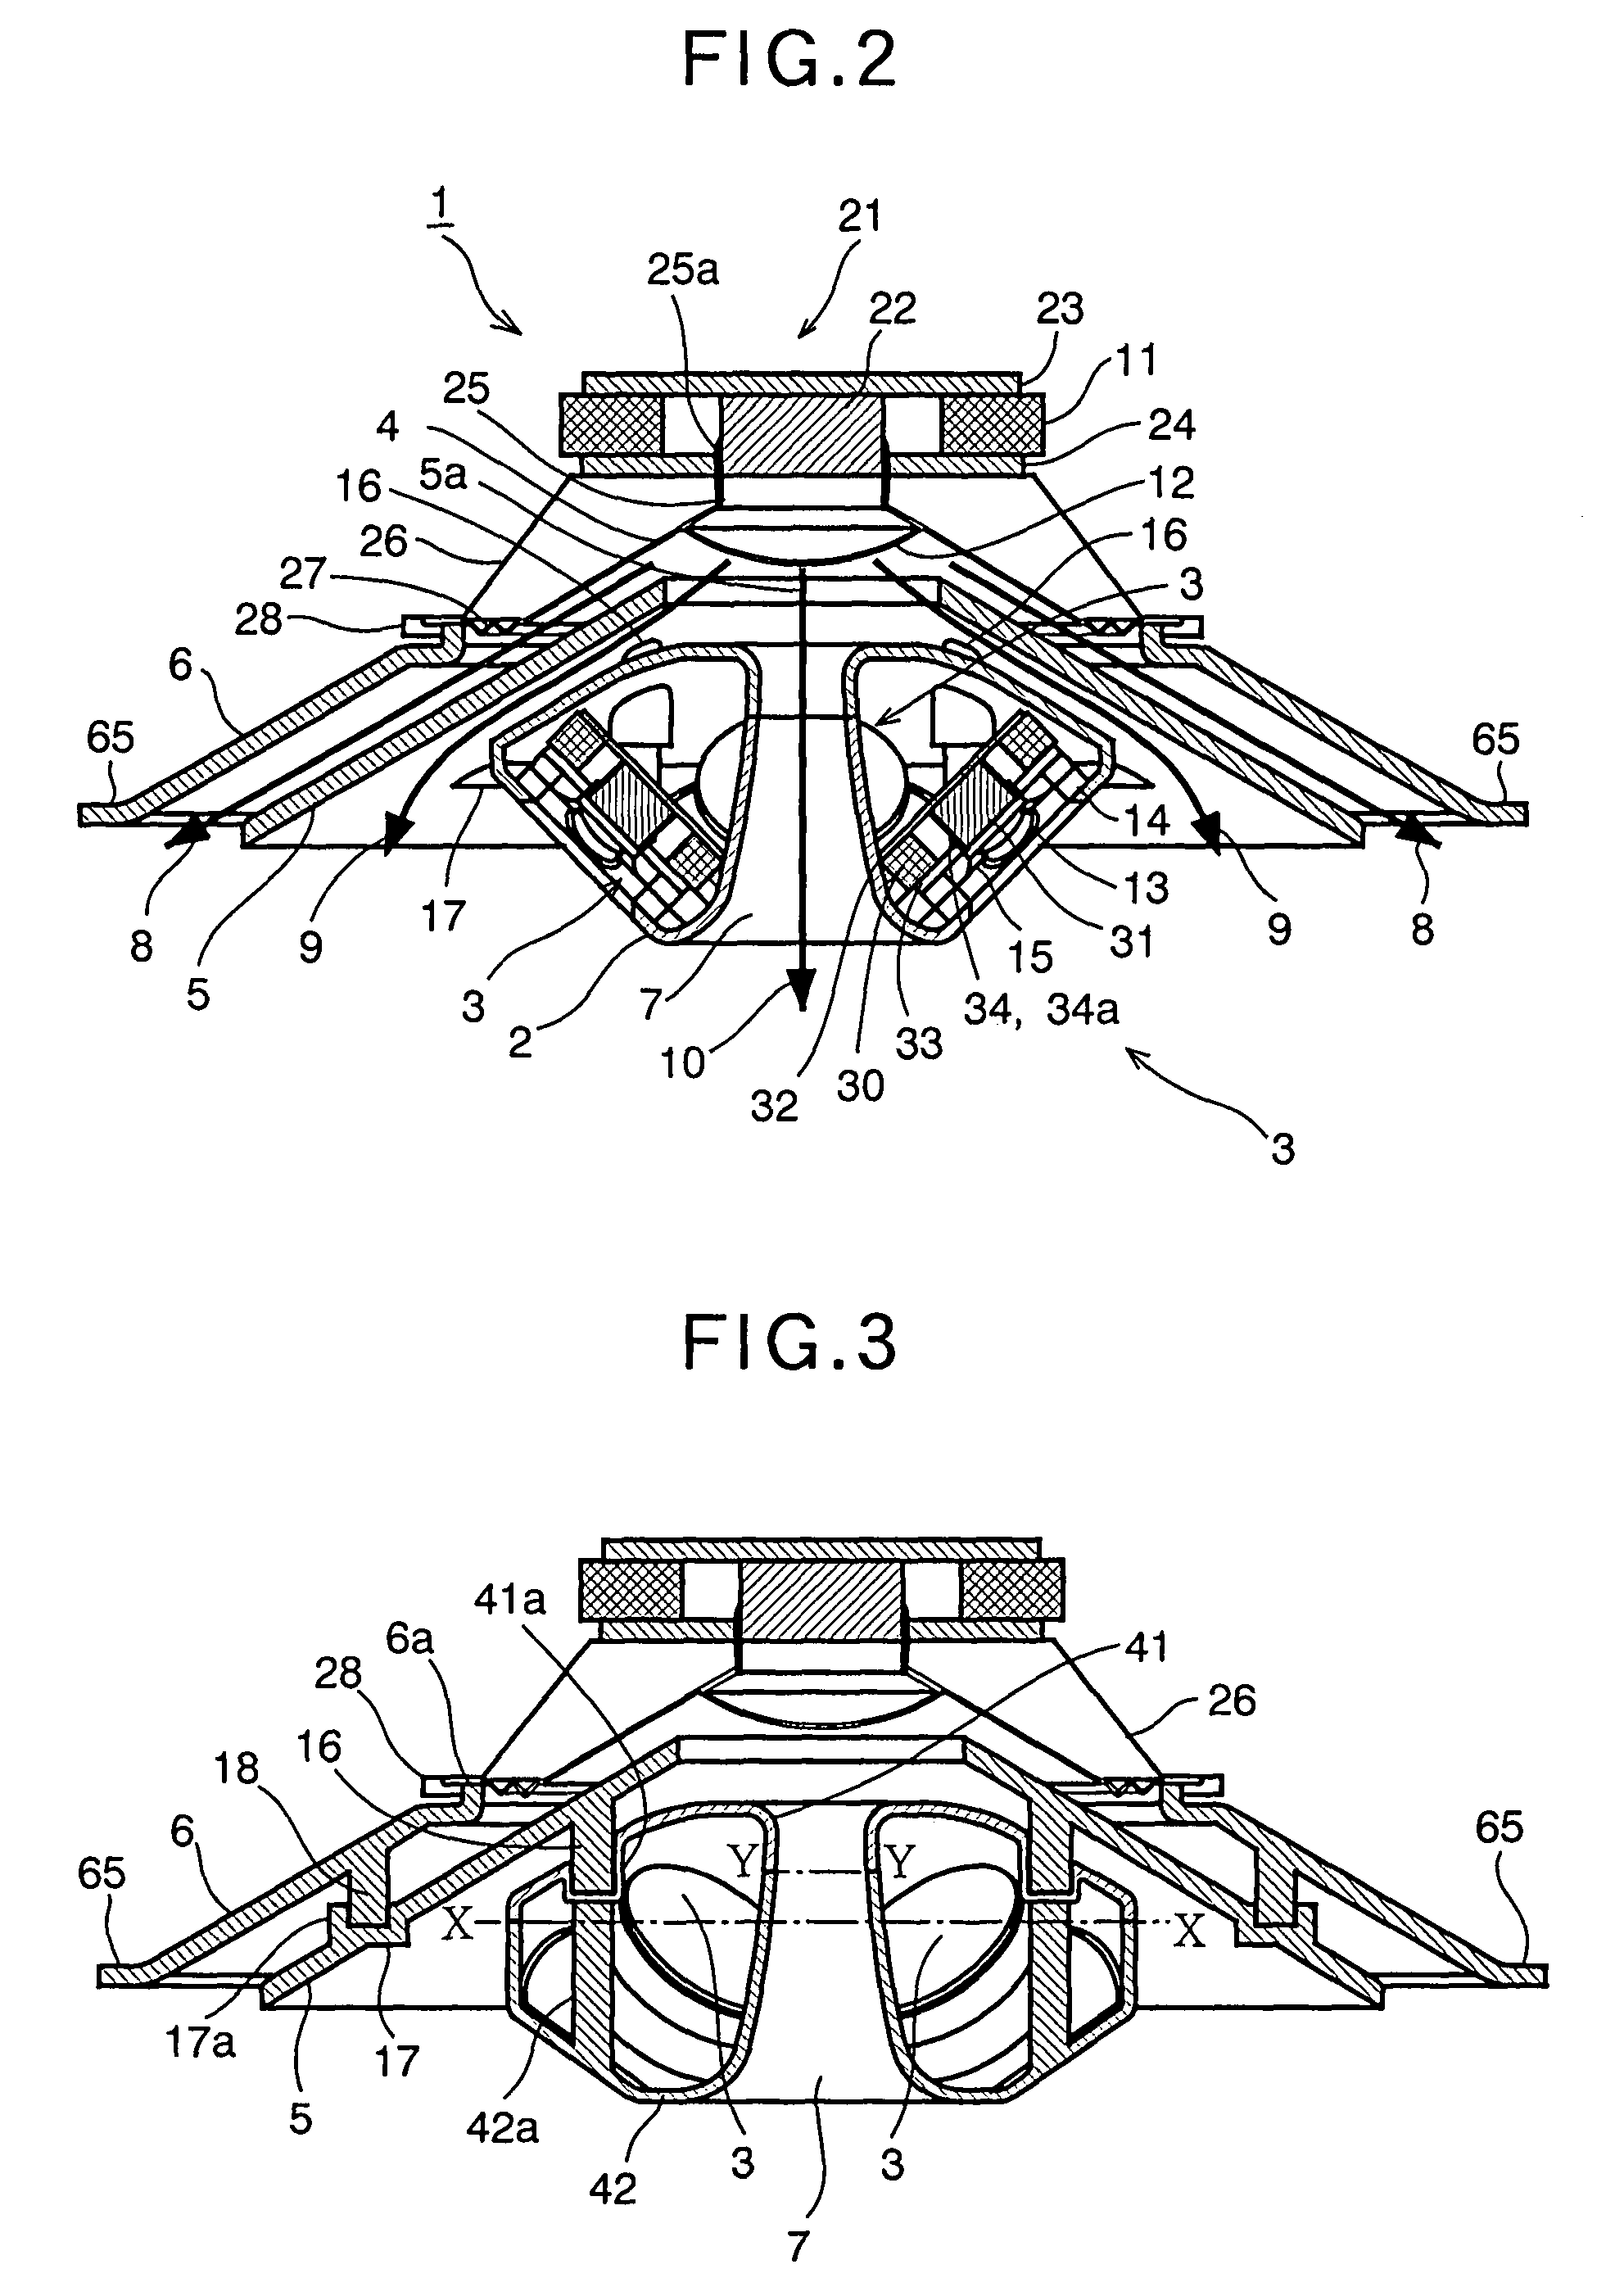 Speaker system with broad directivity